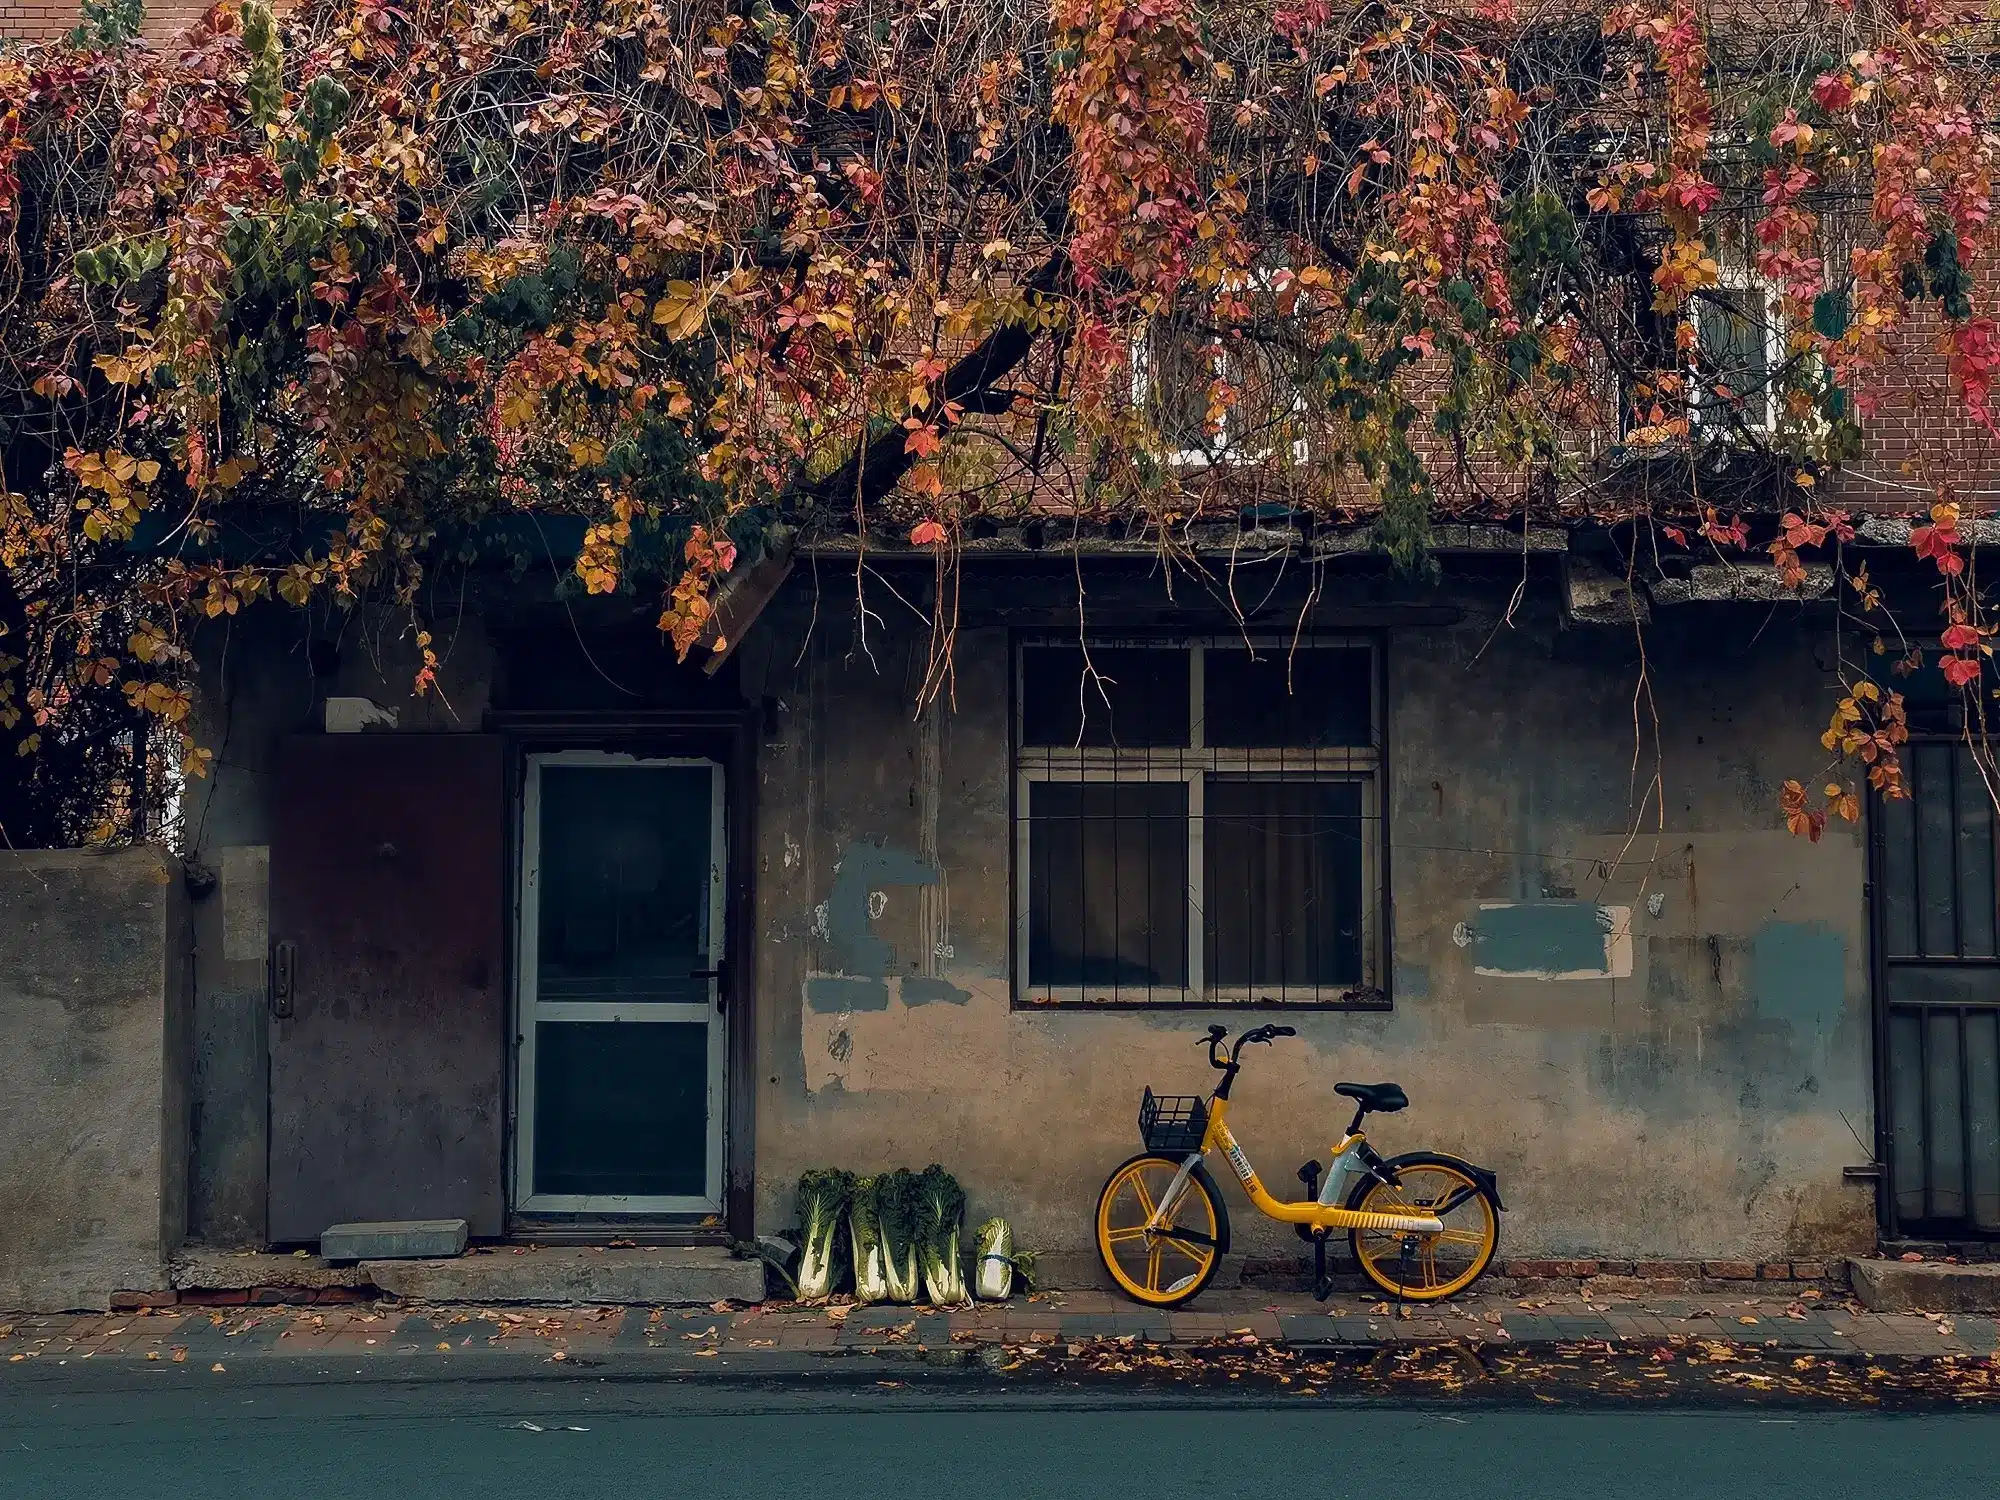 An old house with a bicycle in front, representing the concept of tax depreciation.